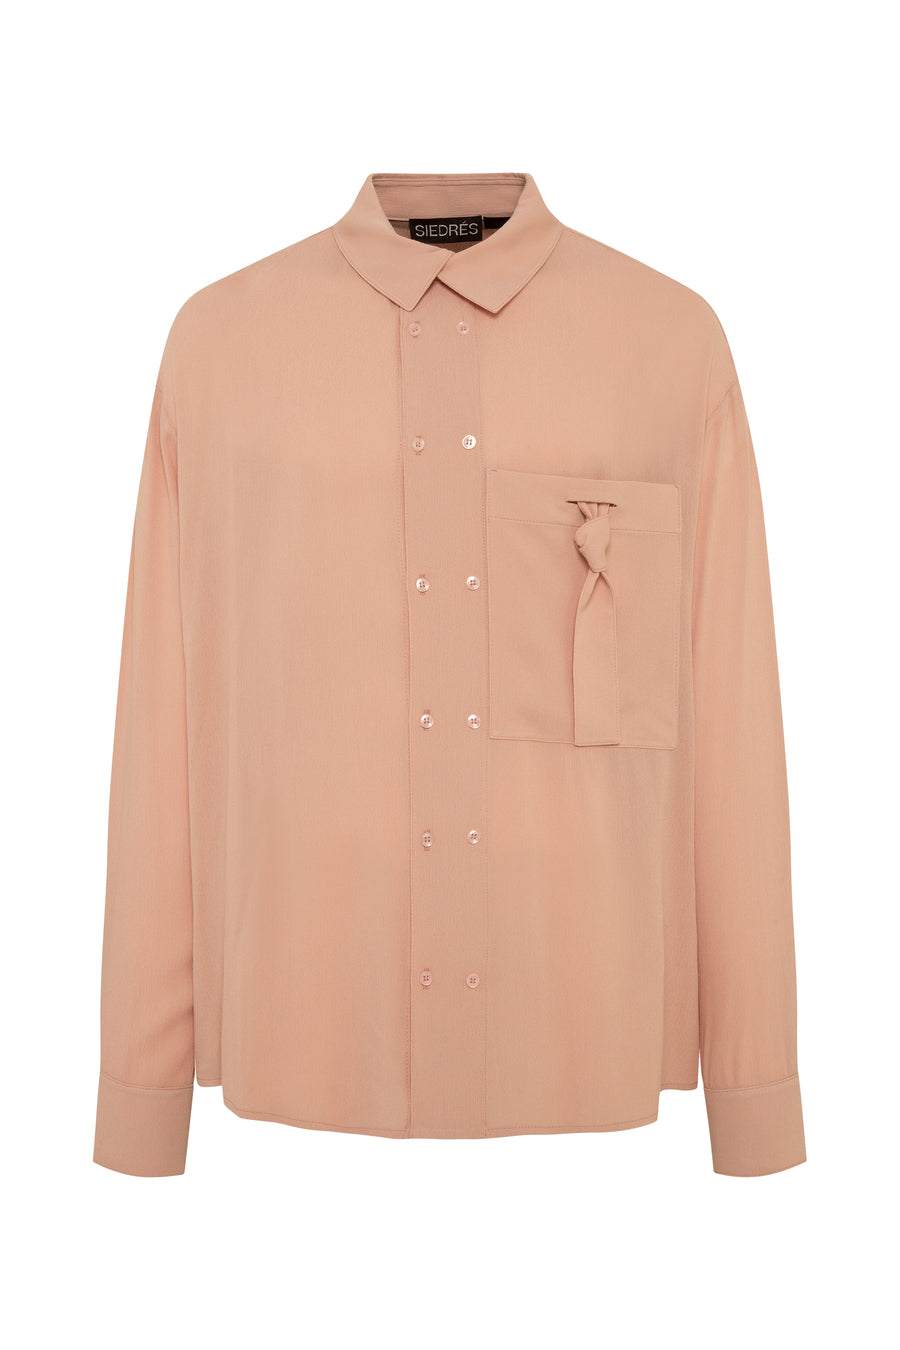 ELI - Button-up crinkled shirt with thick box plate